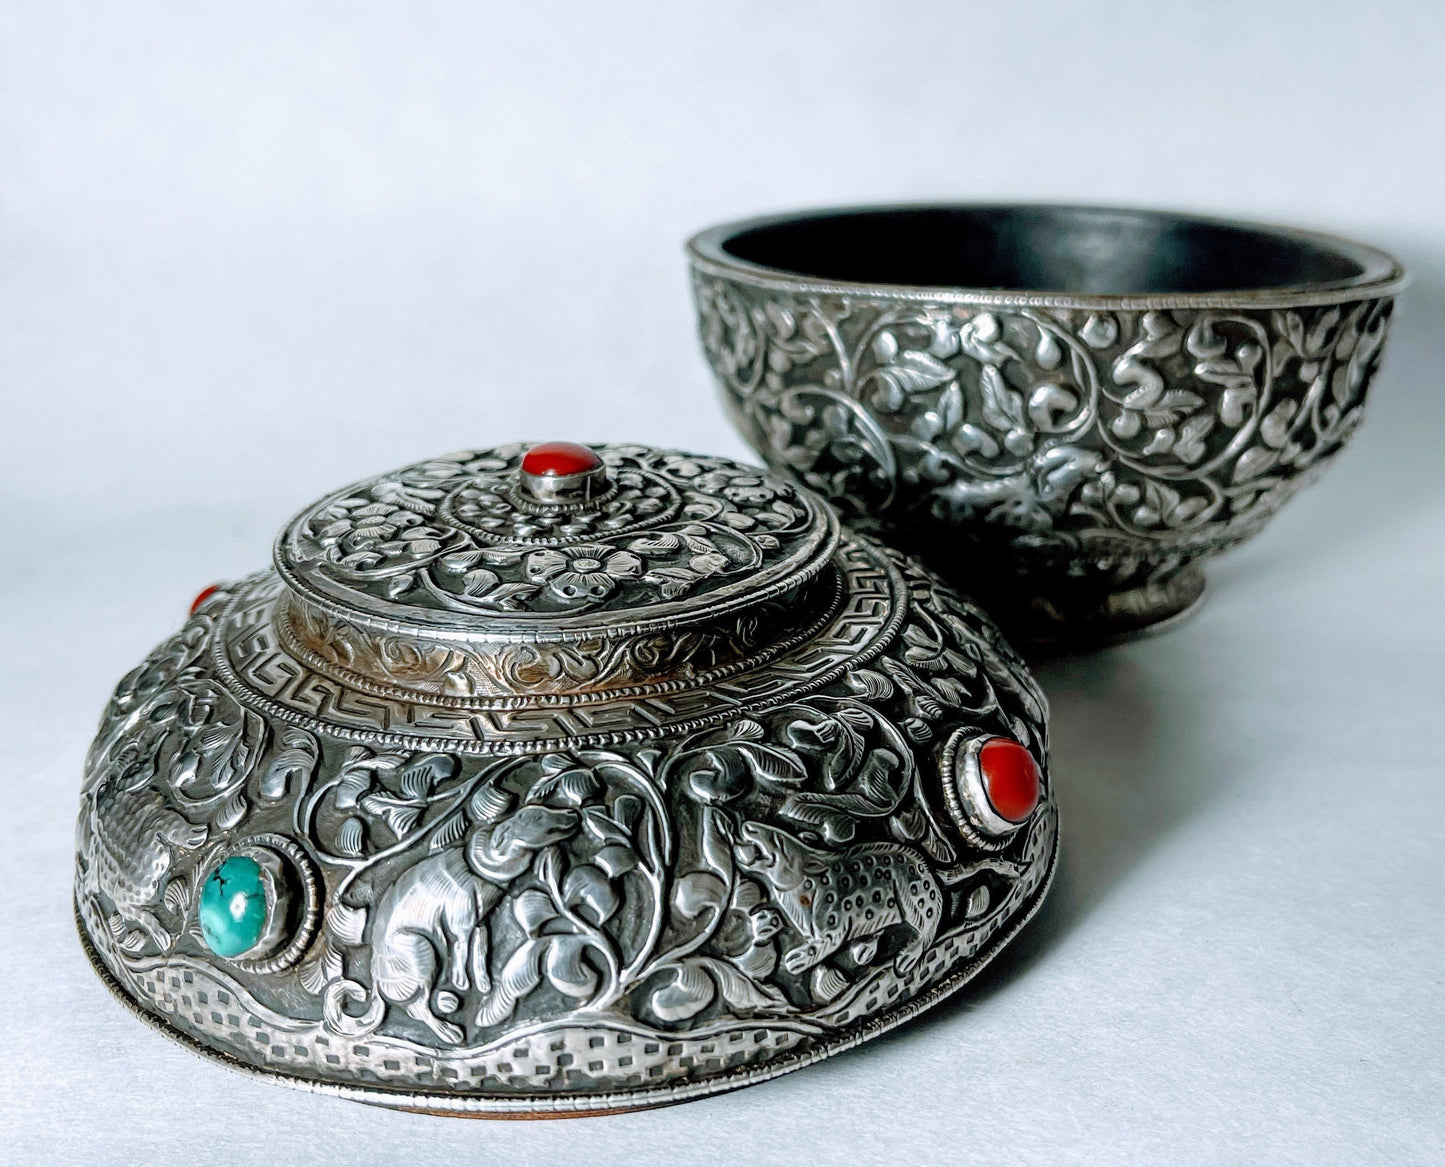 A vintage Tibetan silver covered wooden bowl with heavy carvings and turquoise and coral cabochons